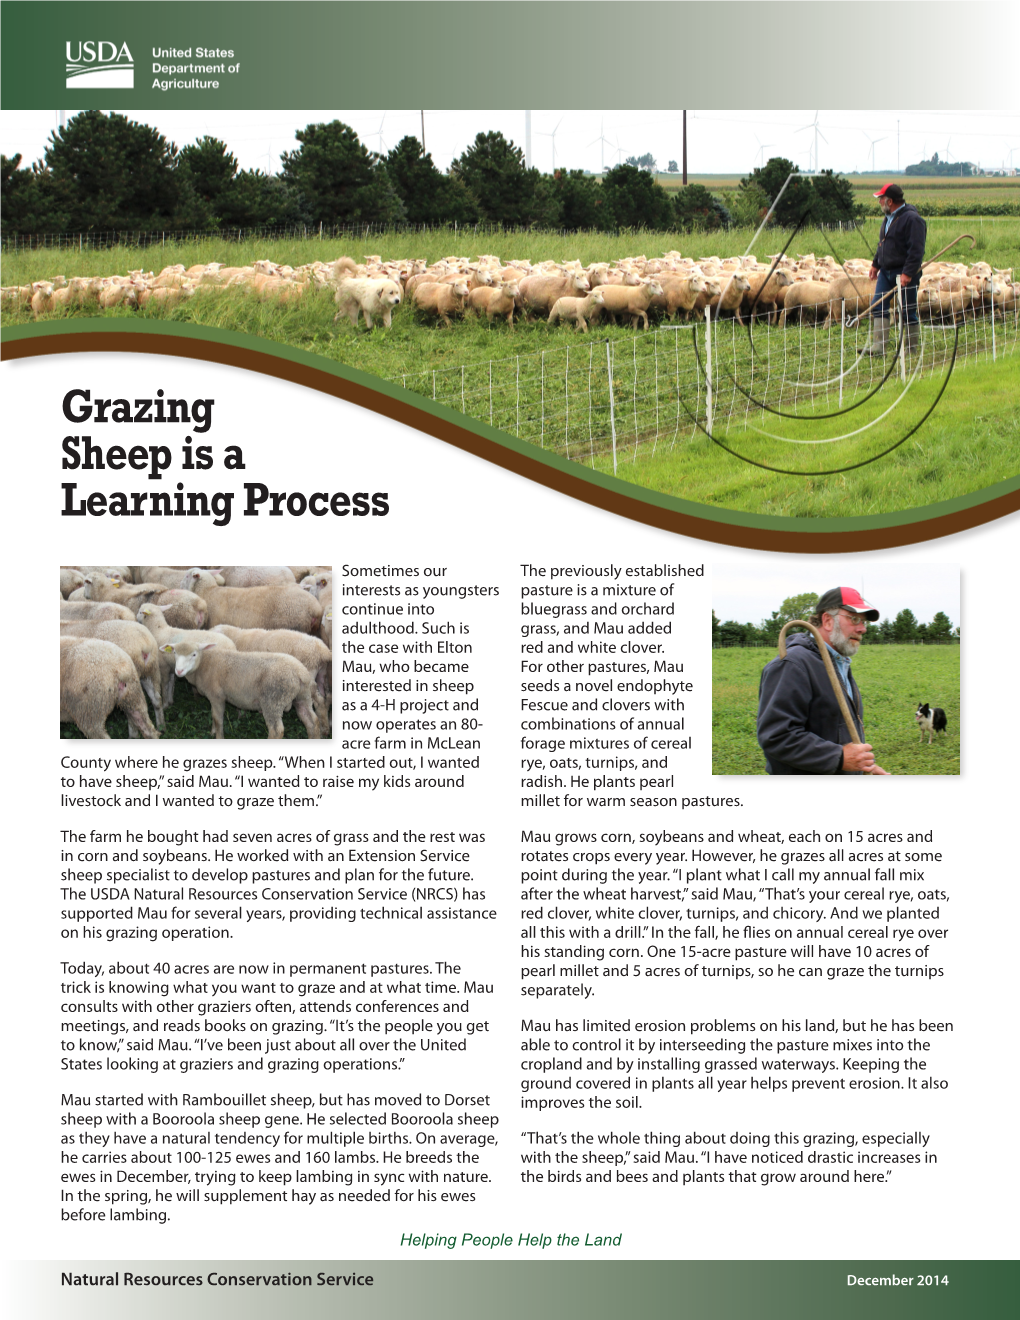 Grazing Sheep Is a Learning Process